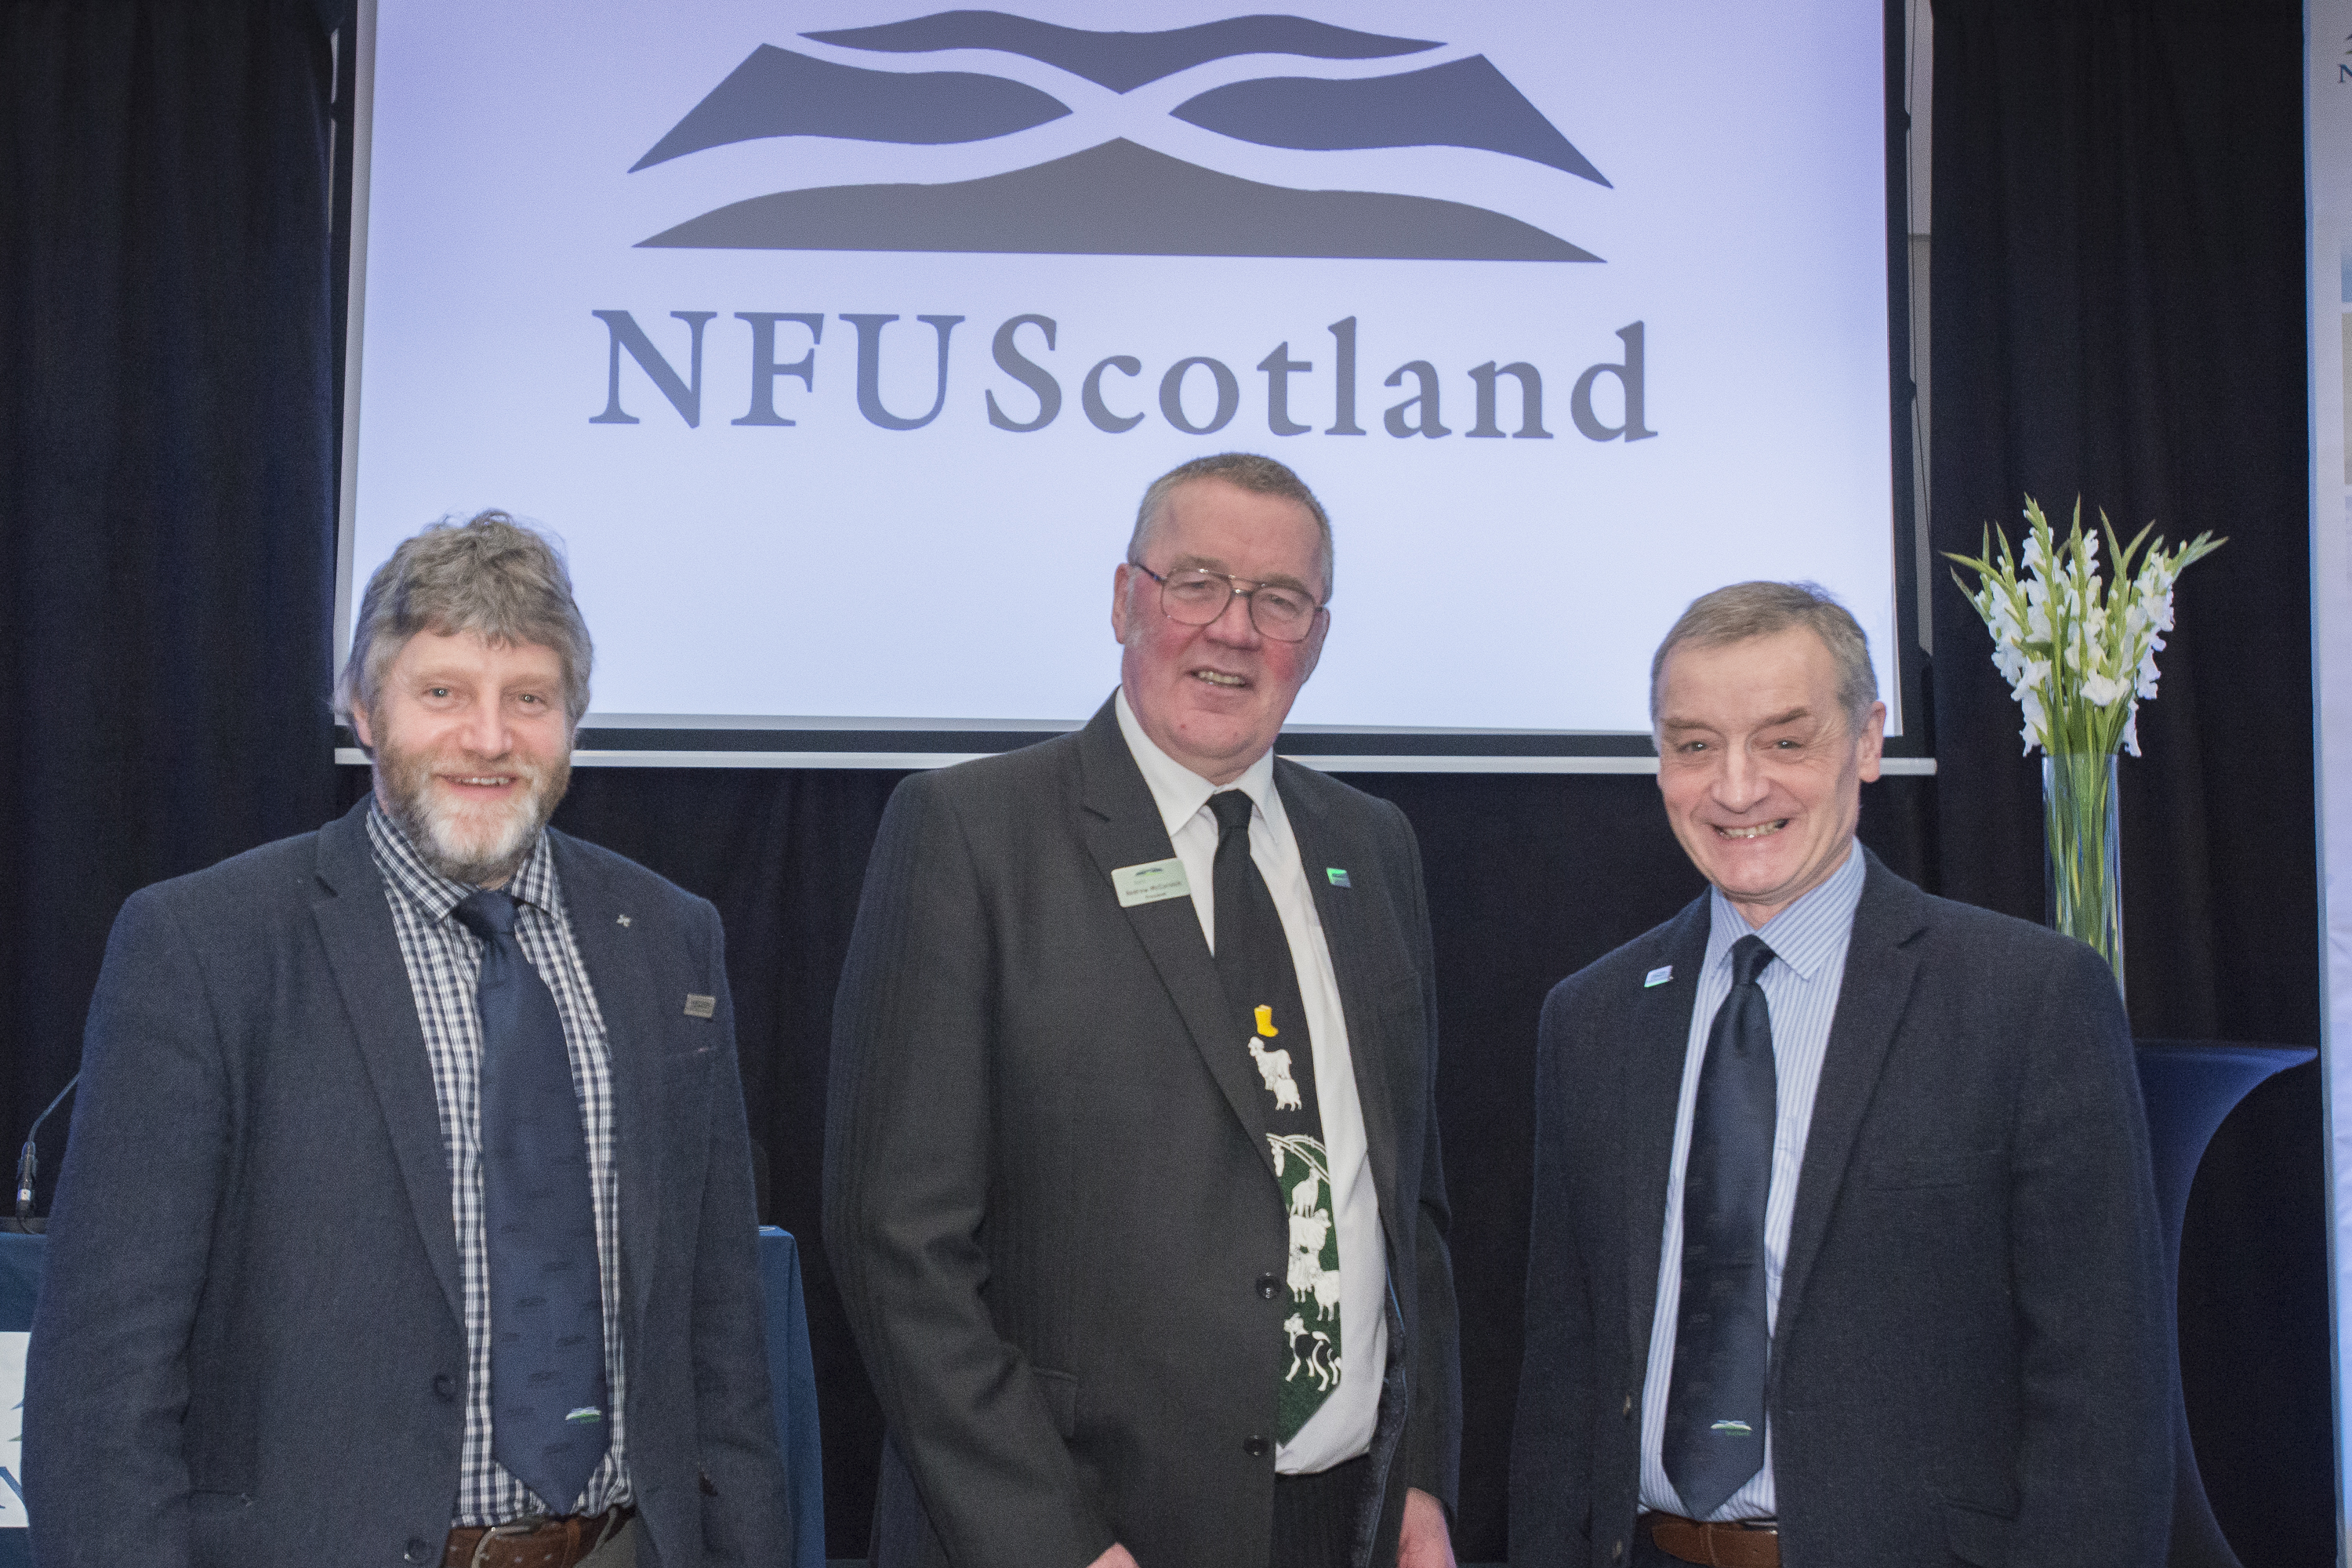 The new NFUS top table team of Martin Kennedy, Andrew McCornick and Charlie Adam.